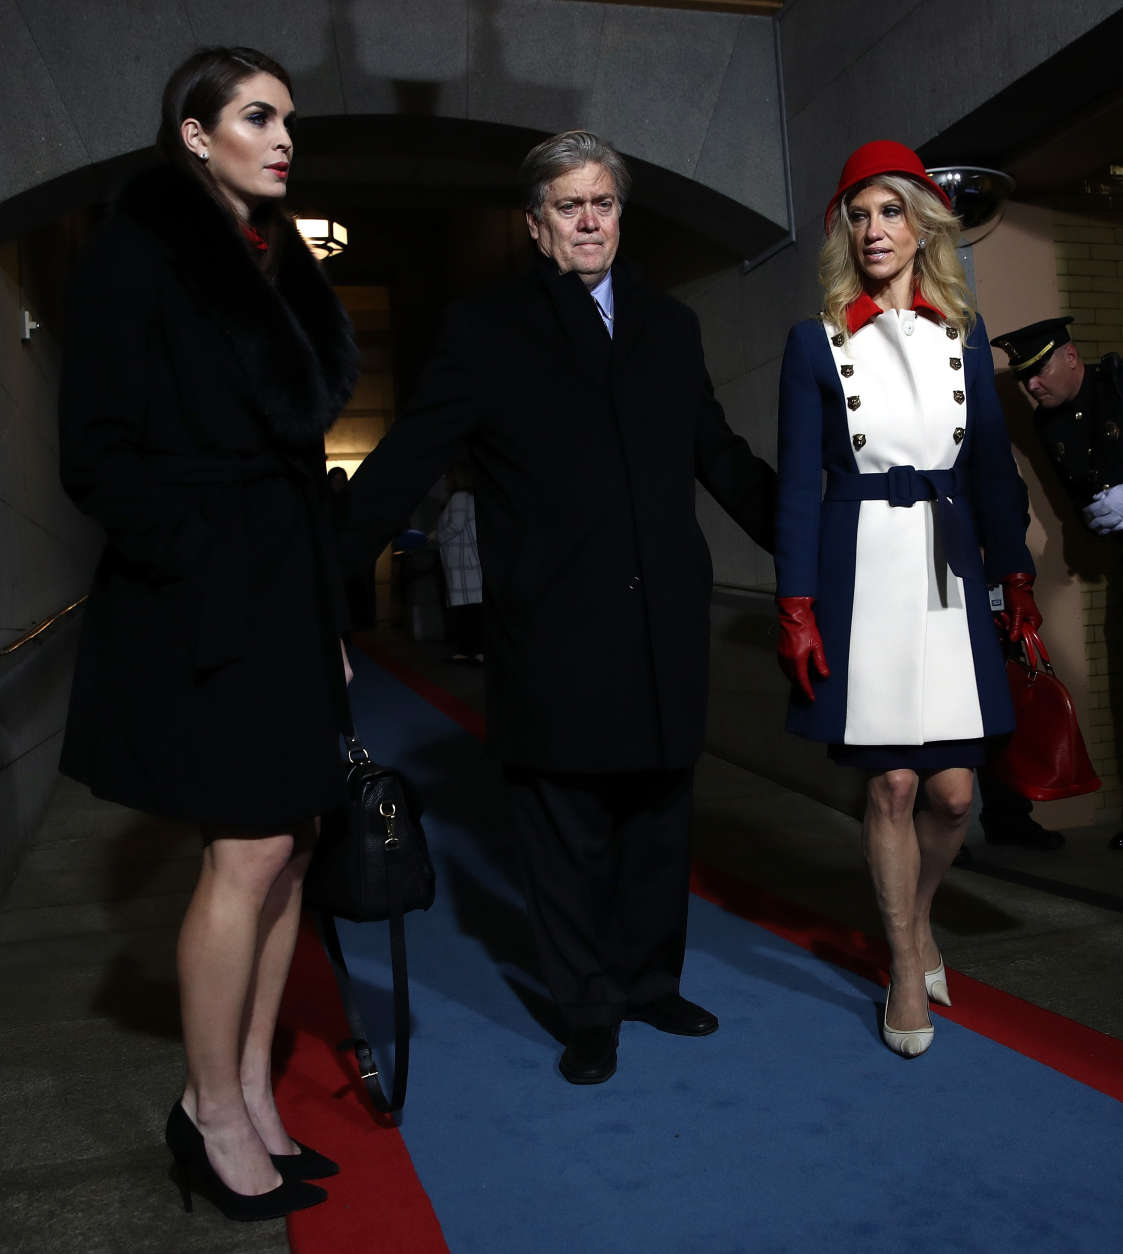 WASHINGTON, DC - JANUARY 20:  (L-R) Donald Trump's White House Director of Strategic Communications Hope Hicks, Senior Counselor Steve Bannon and Counselor to the President Kellyanne Conway arrive for the presidential inauguration on the West Front of the U.S. Capitol on January 20, 2017 in Washington, DC. In today's inauguration ceremony Donald J. Trump becomes the 45th president of the United States.  (Photo by Win McNamee/Getty Images)